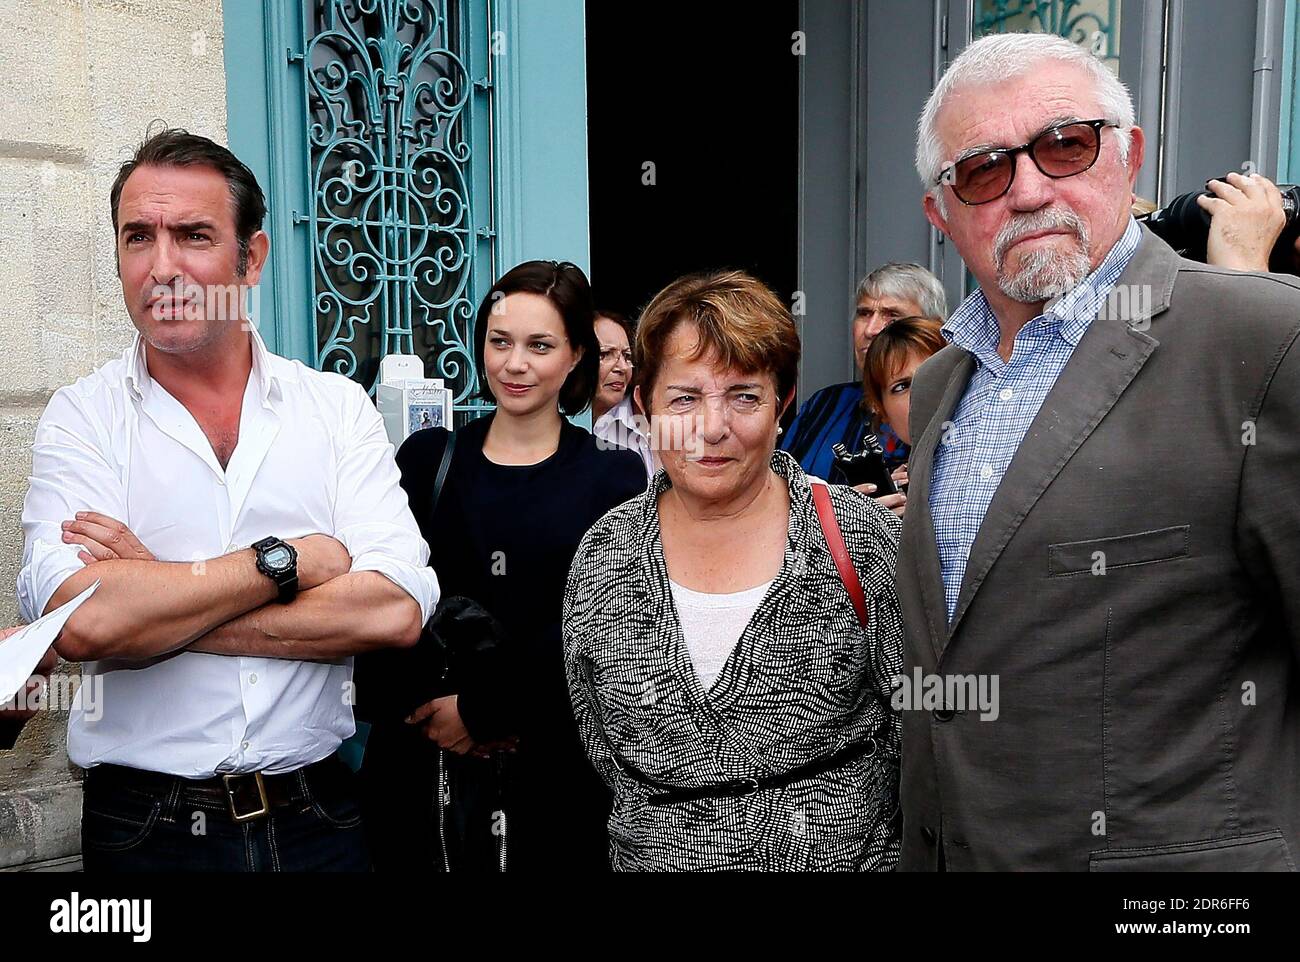 File : French actor Jean Dujardin along with his companion former ice  dancer Nathalie Pechalat and his parents inaugurates 'Cinema Jean Dujardin',  the first movie theatre carrying his name, in his home